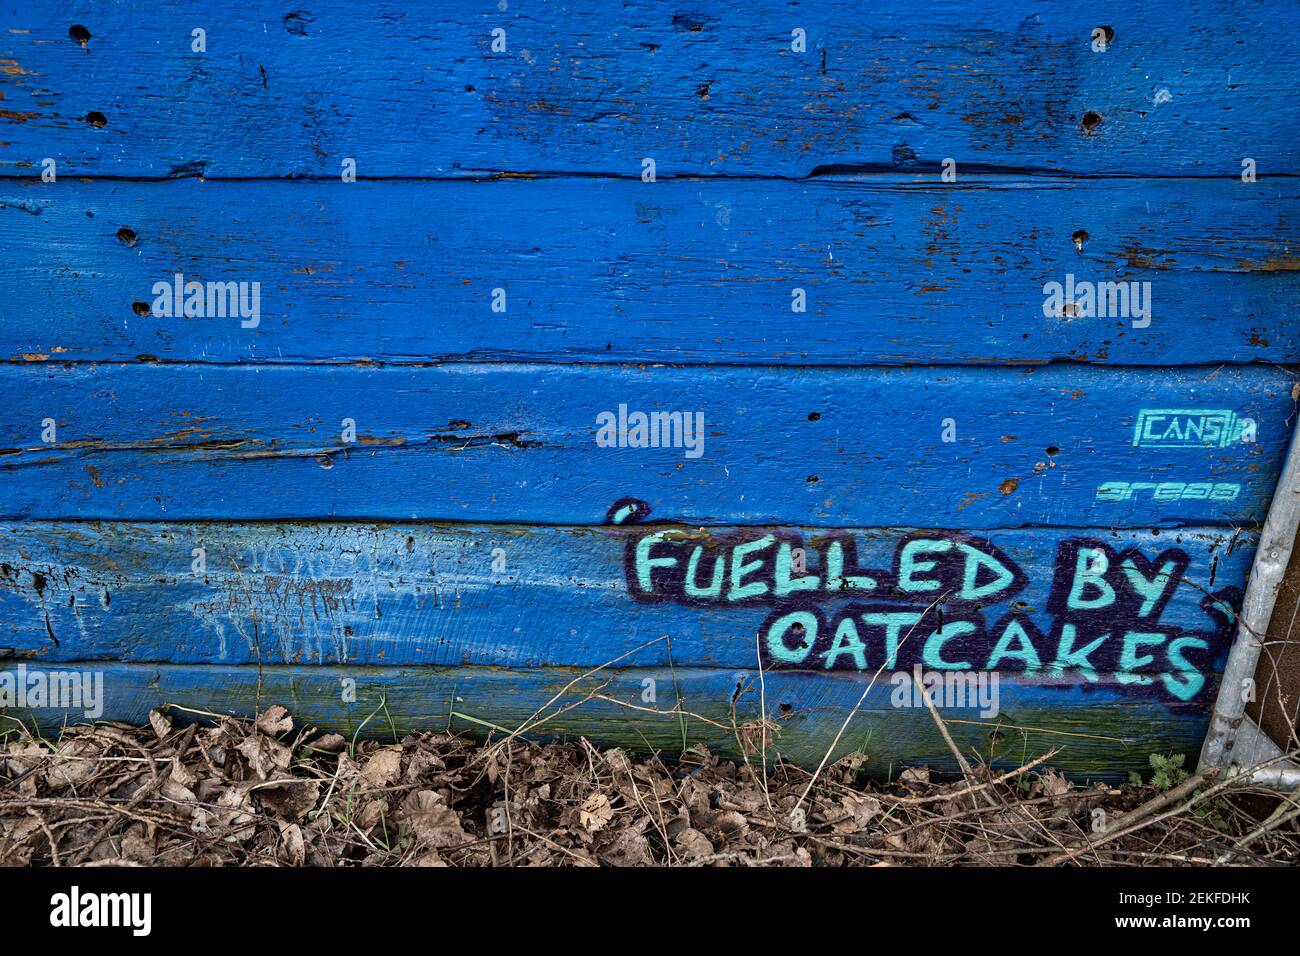 Graffiti on a fence by the Trent and Mersey canal, Middleport, Stoke-on-Trent, UK saying 'Fuelled by oatcakes' a local food of the area. Stock Photo